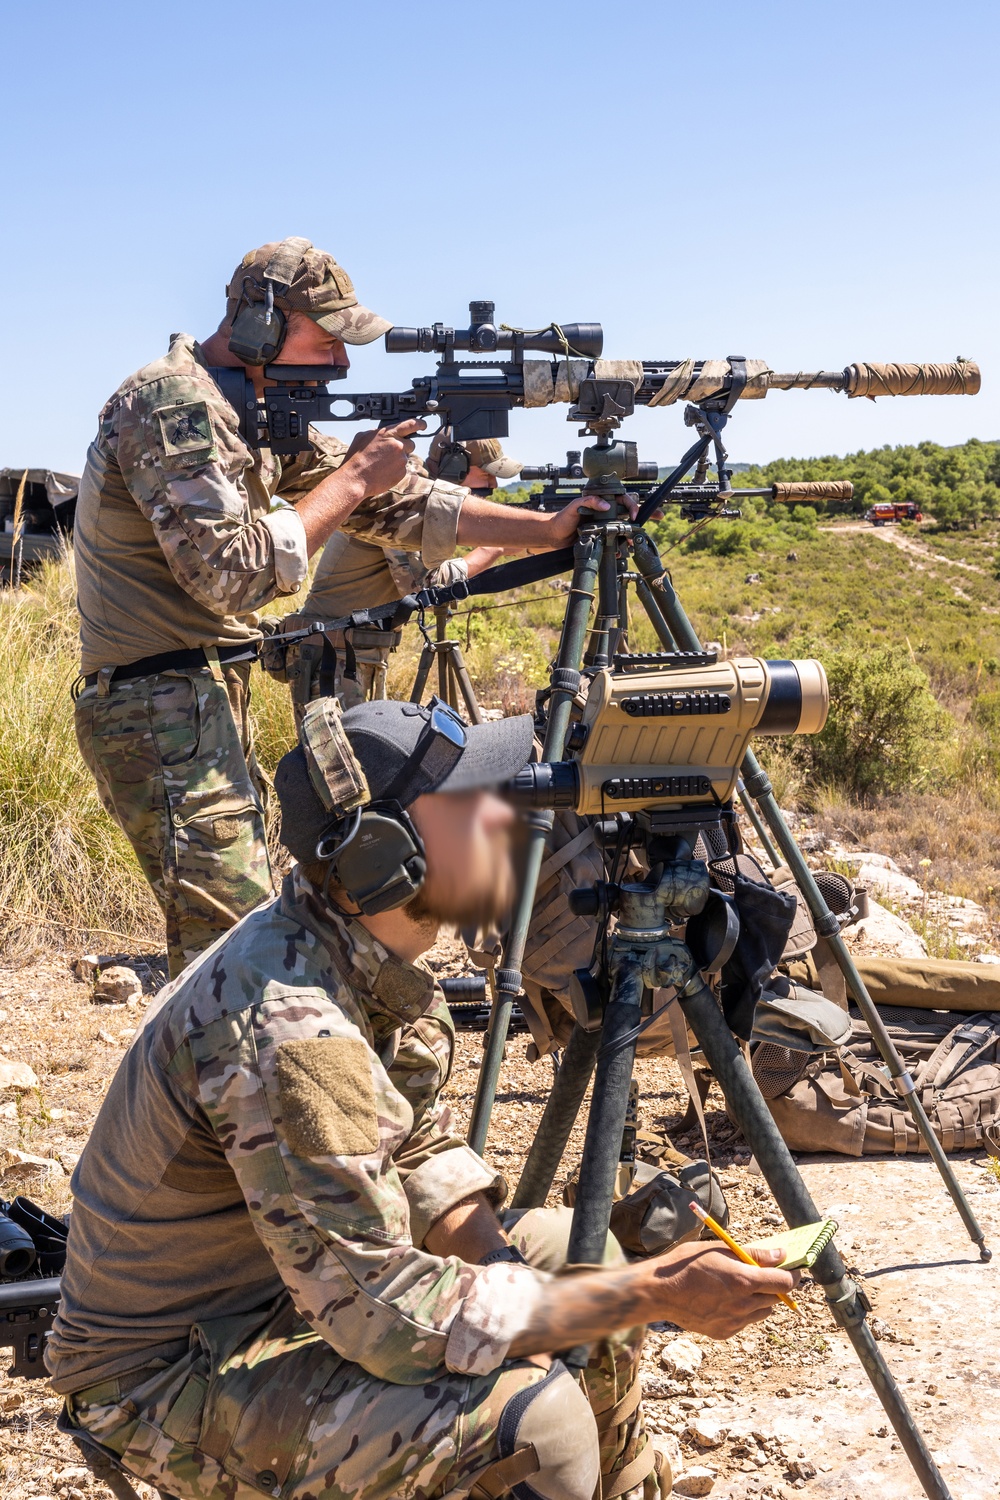 DVIDS - Images - ISTC Desert Sniper Course 21 [Image 3 of 23]